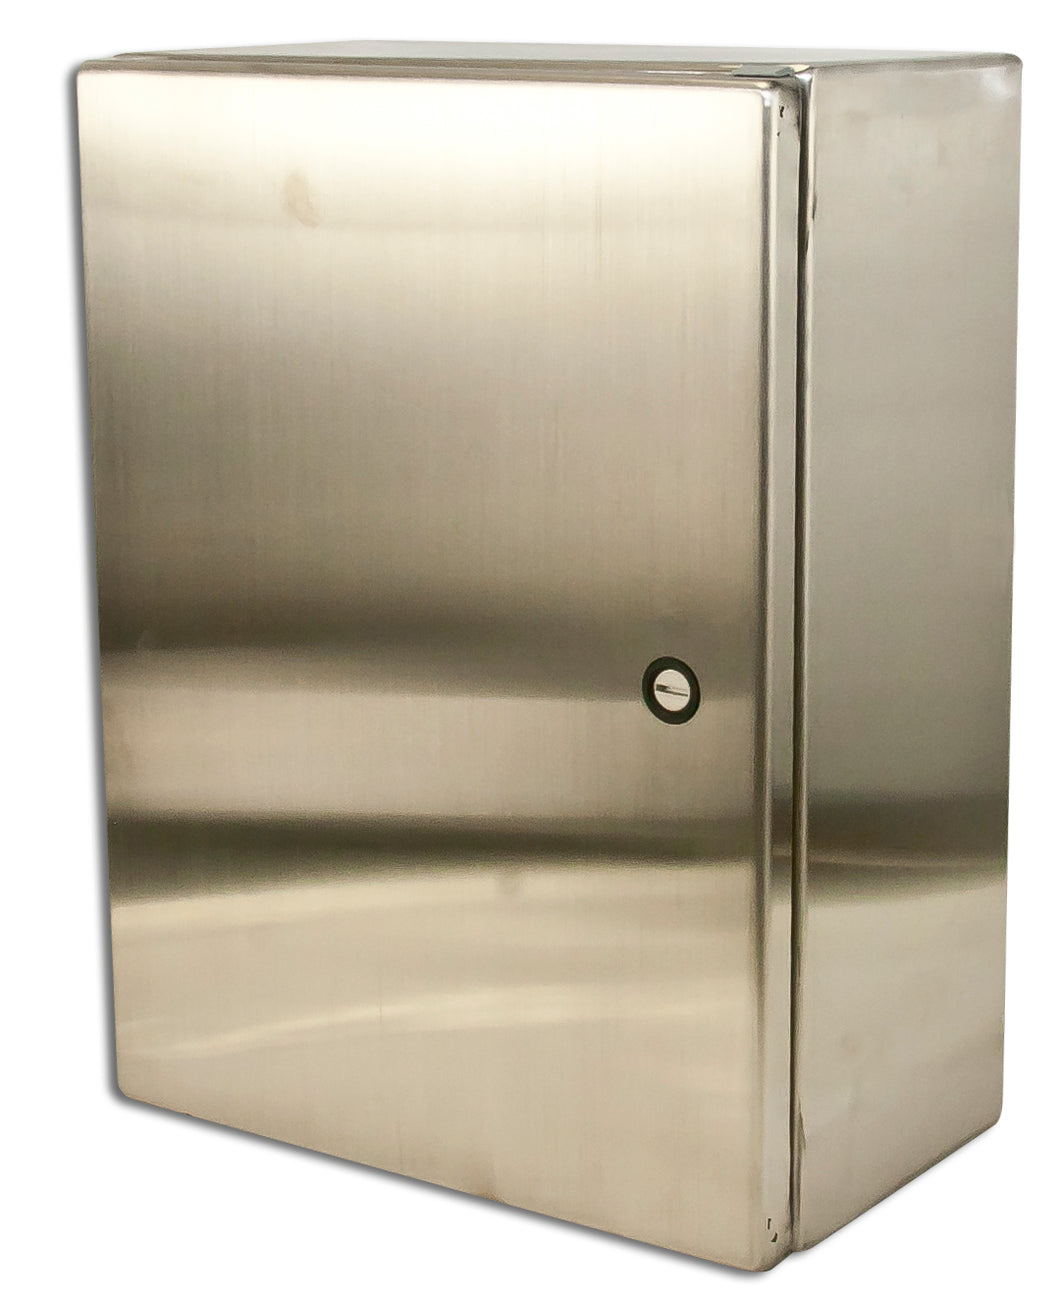 nVent Hoffman CSD30308SS Enclosure, NEMA 4X, Hinged Cover, Stainless Steel, 30